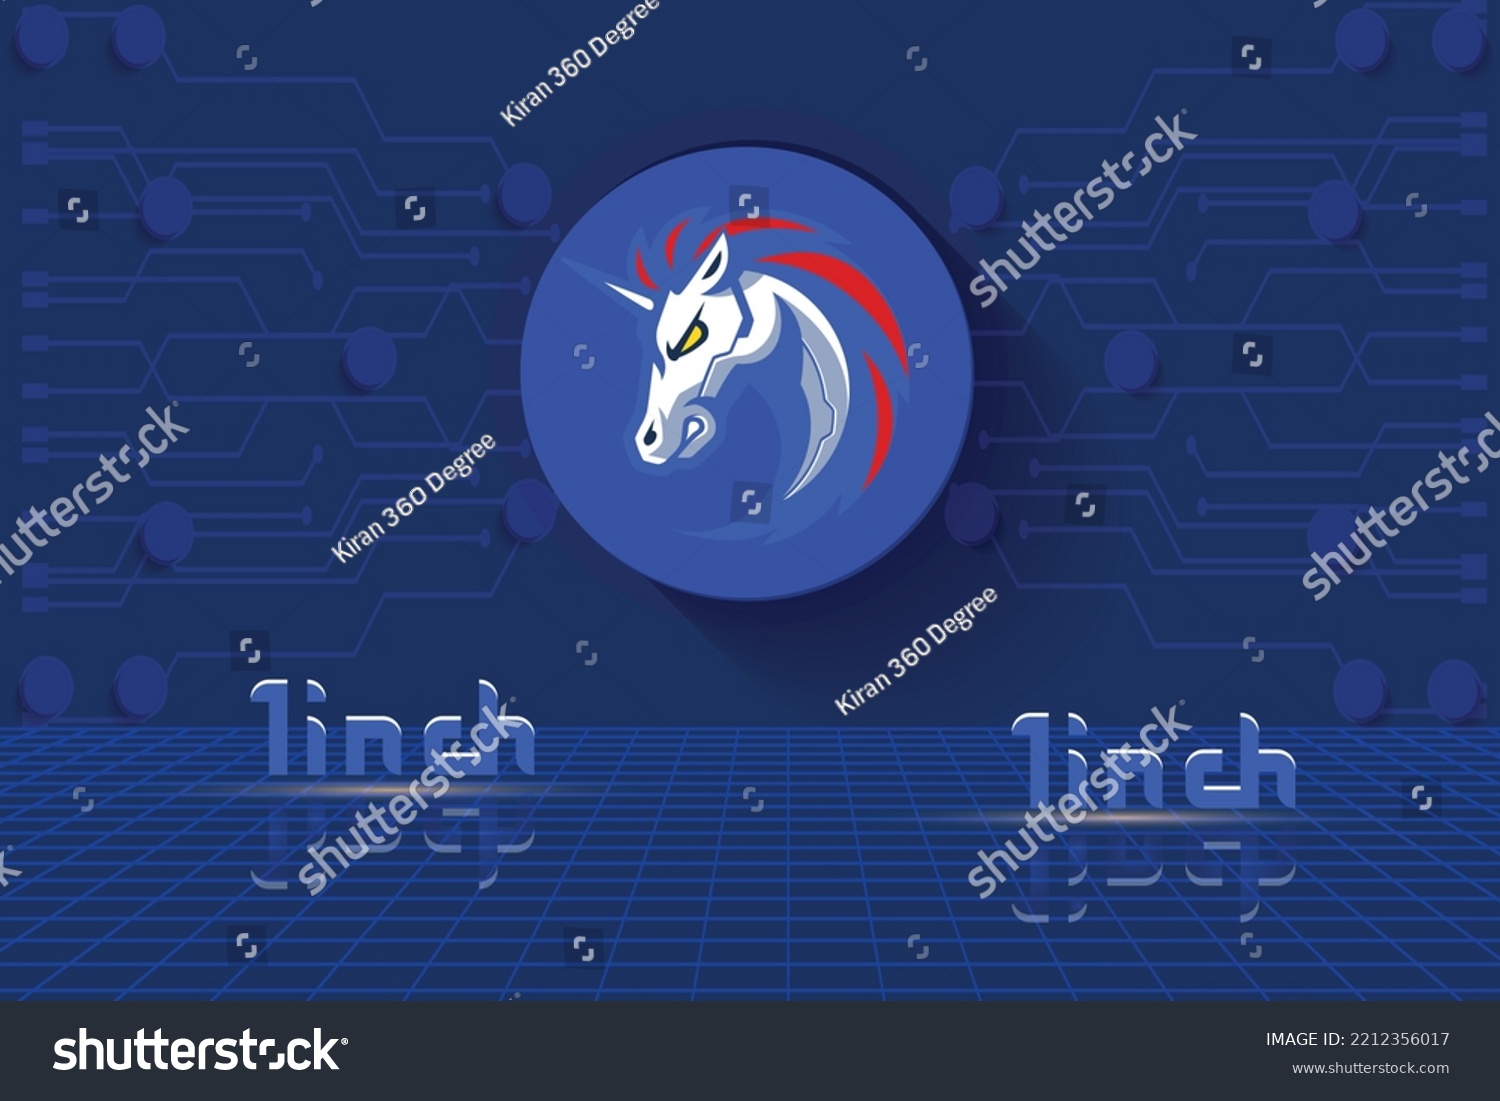 SVG of 1inch Network crypto currency vector illustration block chain based symbol and logo on futuristic digital background. Decentralized money technology illustration. technology background and banner. svg